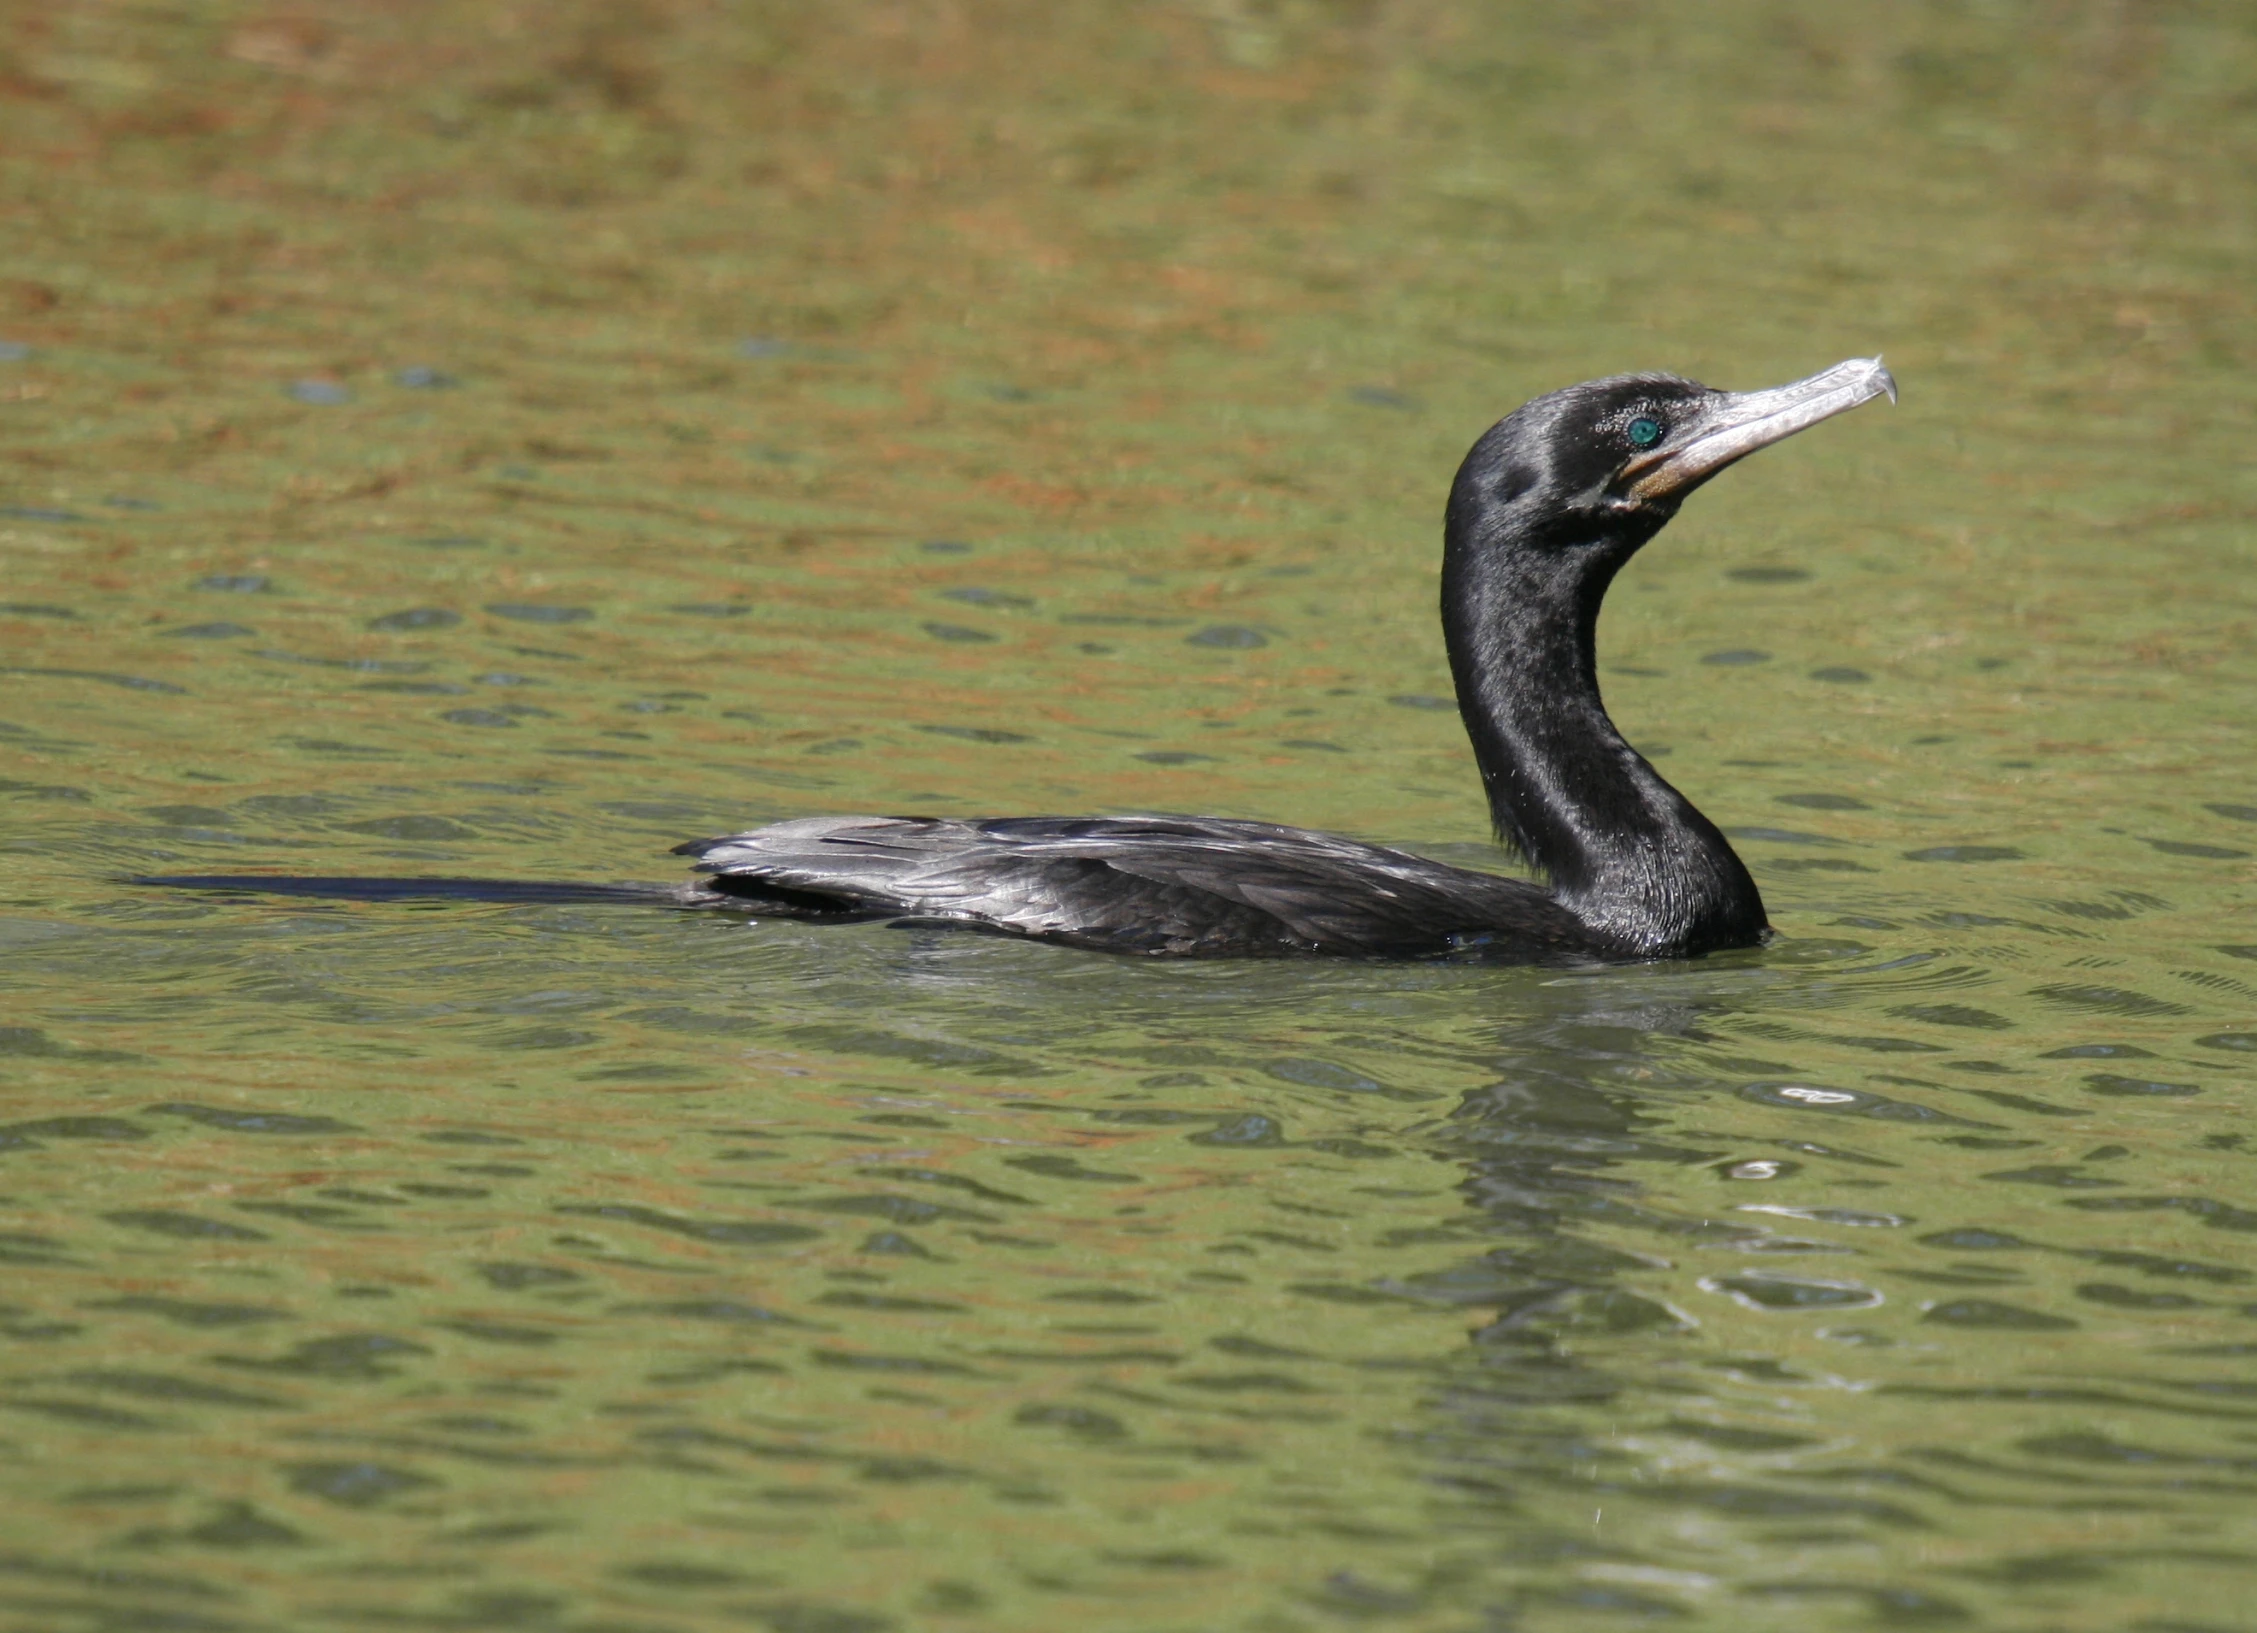 a duck floating in the water with a long beak